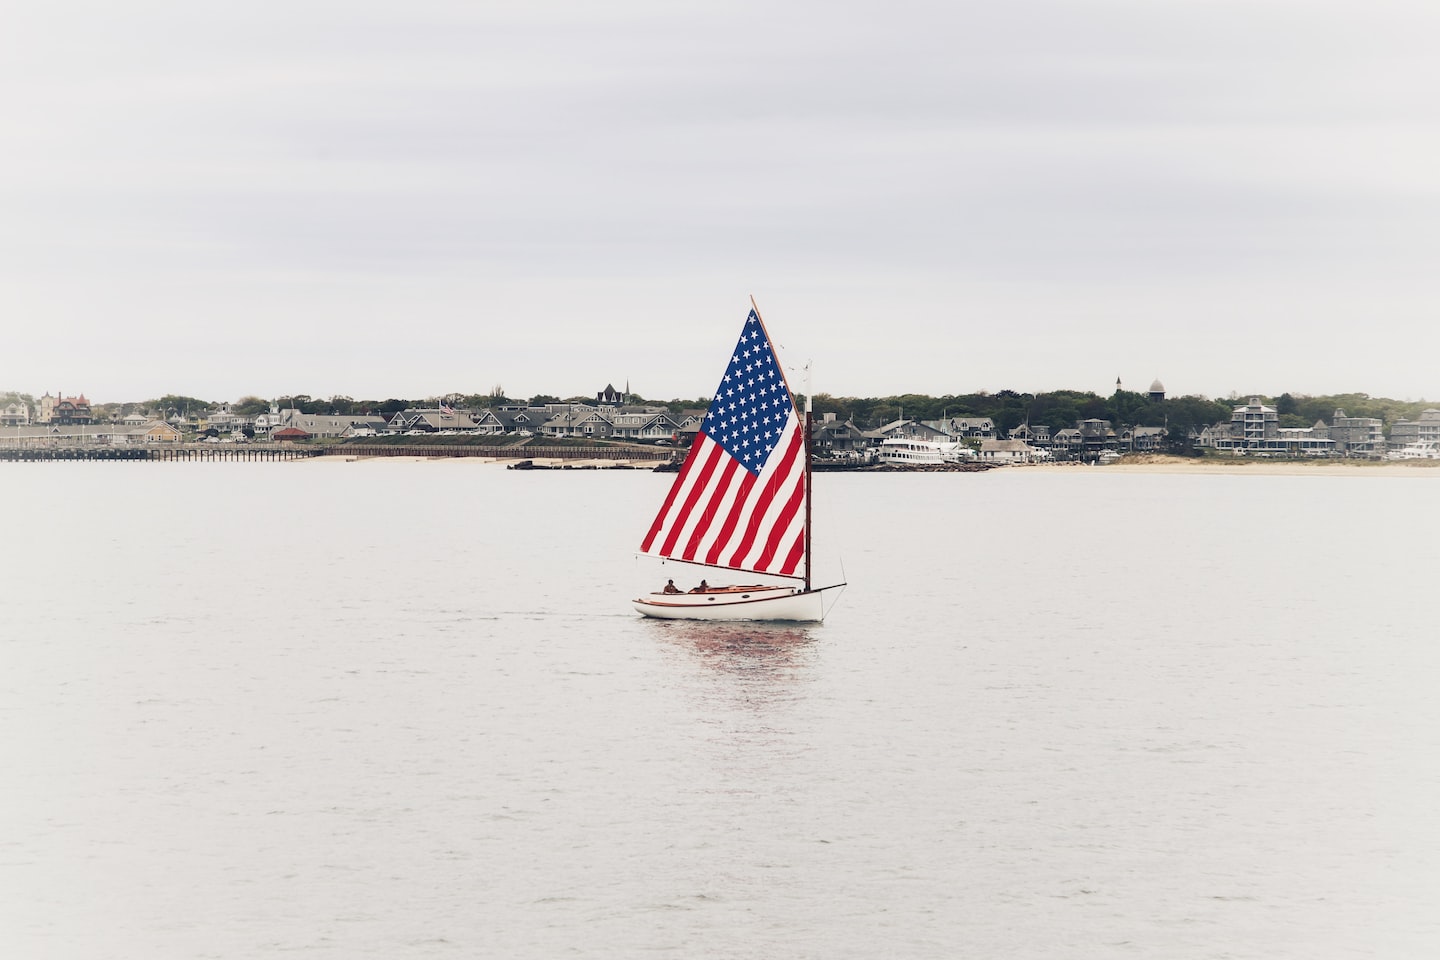 A boat proudly flying the American flag